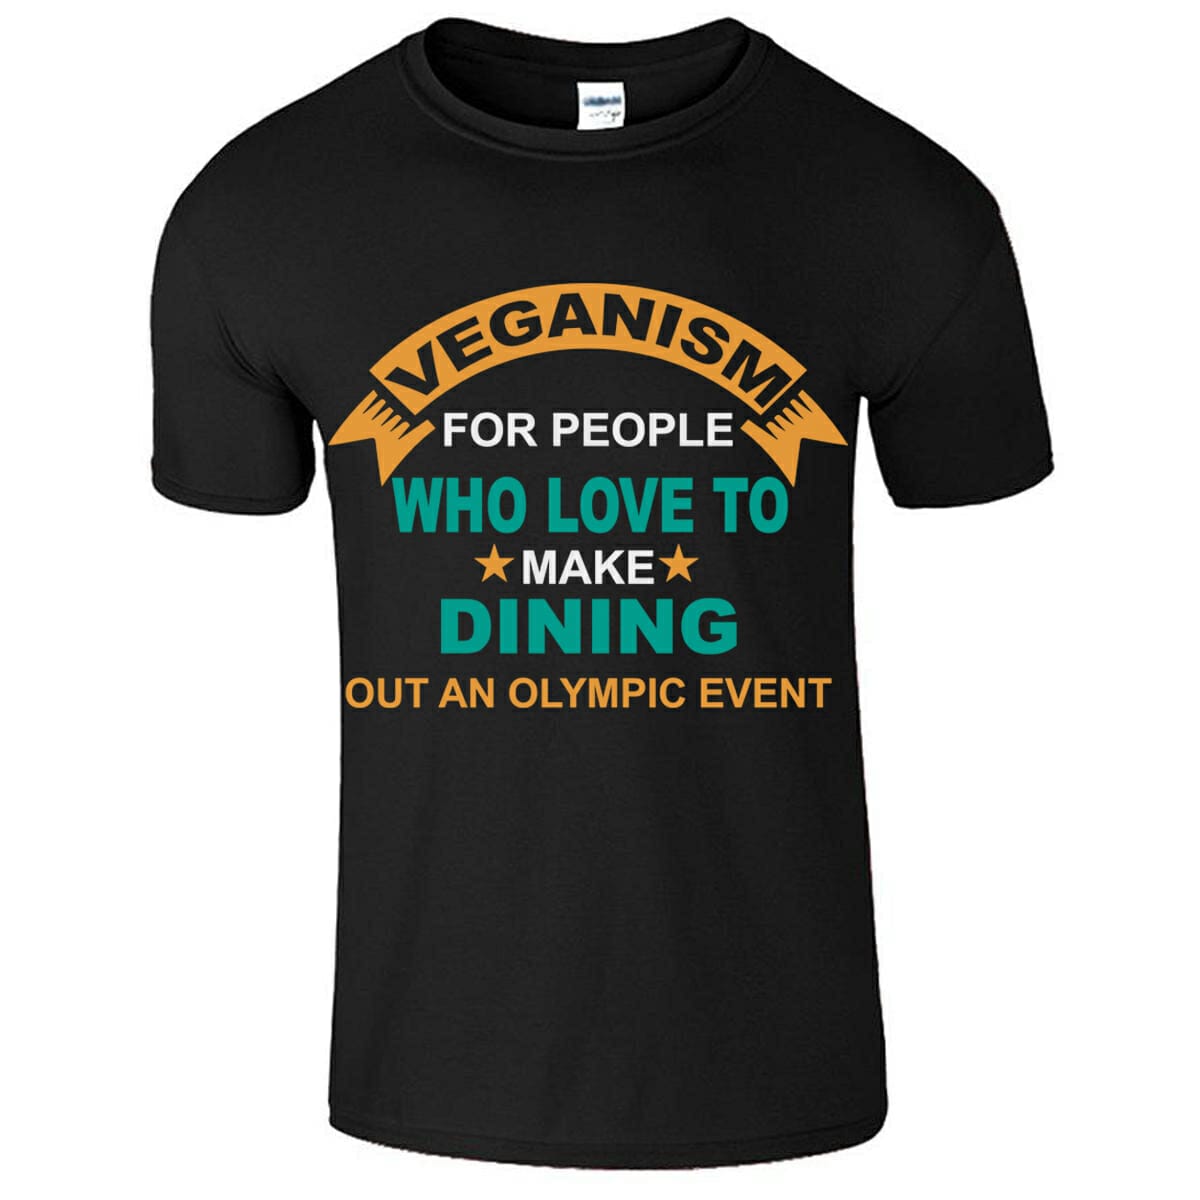 Veganism For People Who Love To Make Dining Out An Olympic Event - Funny T-Shirt Design